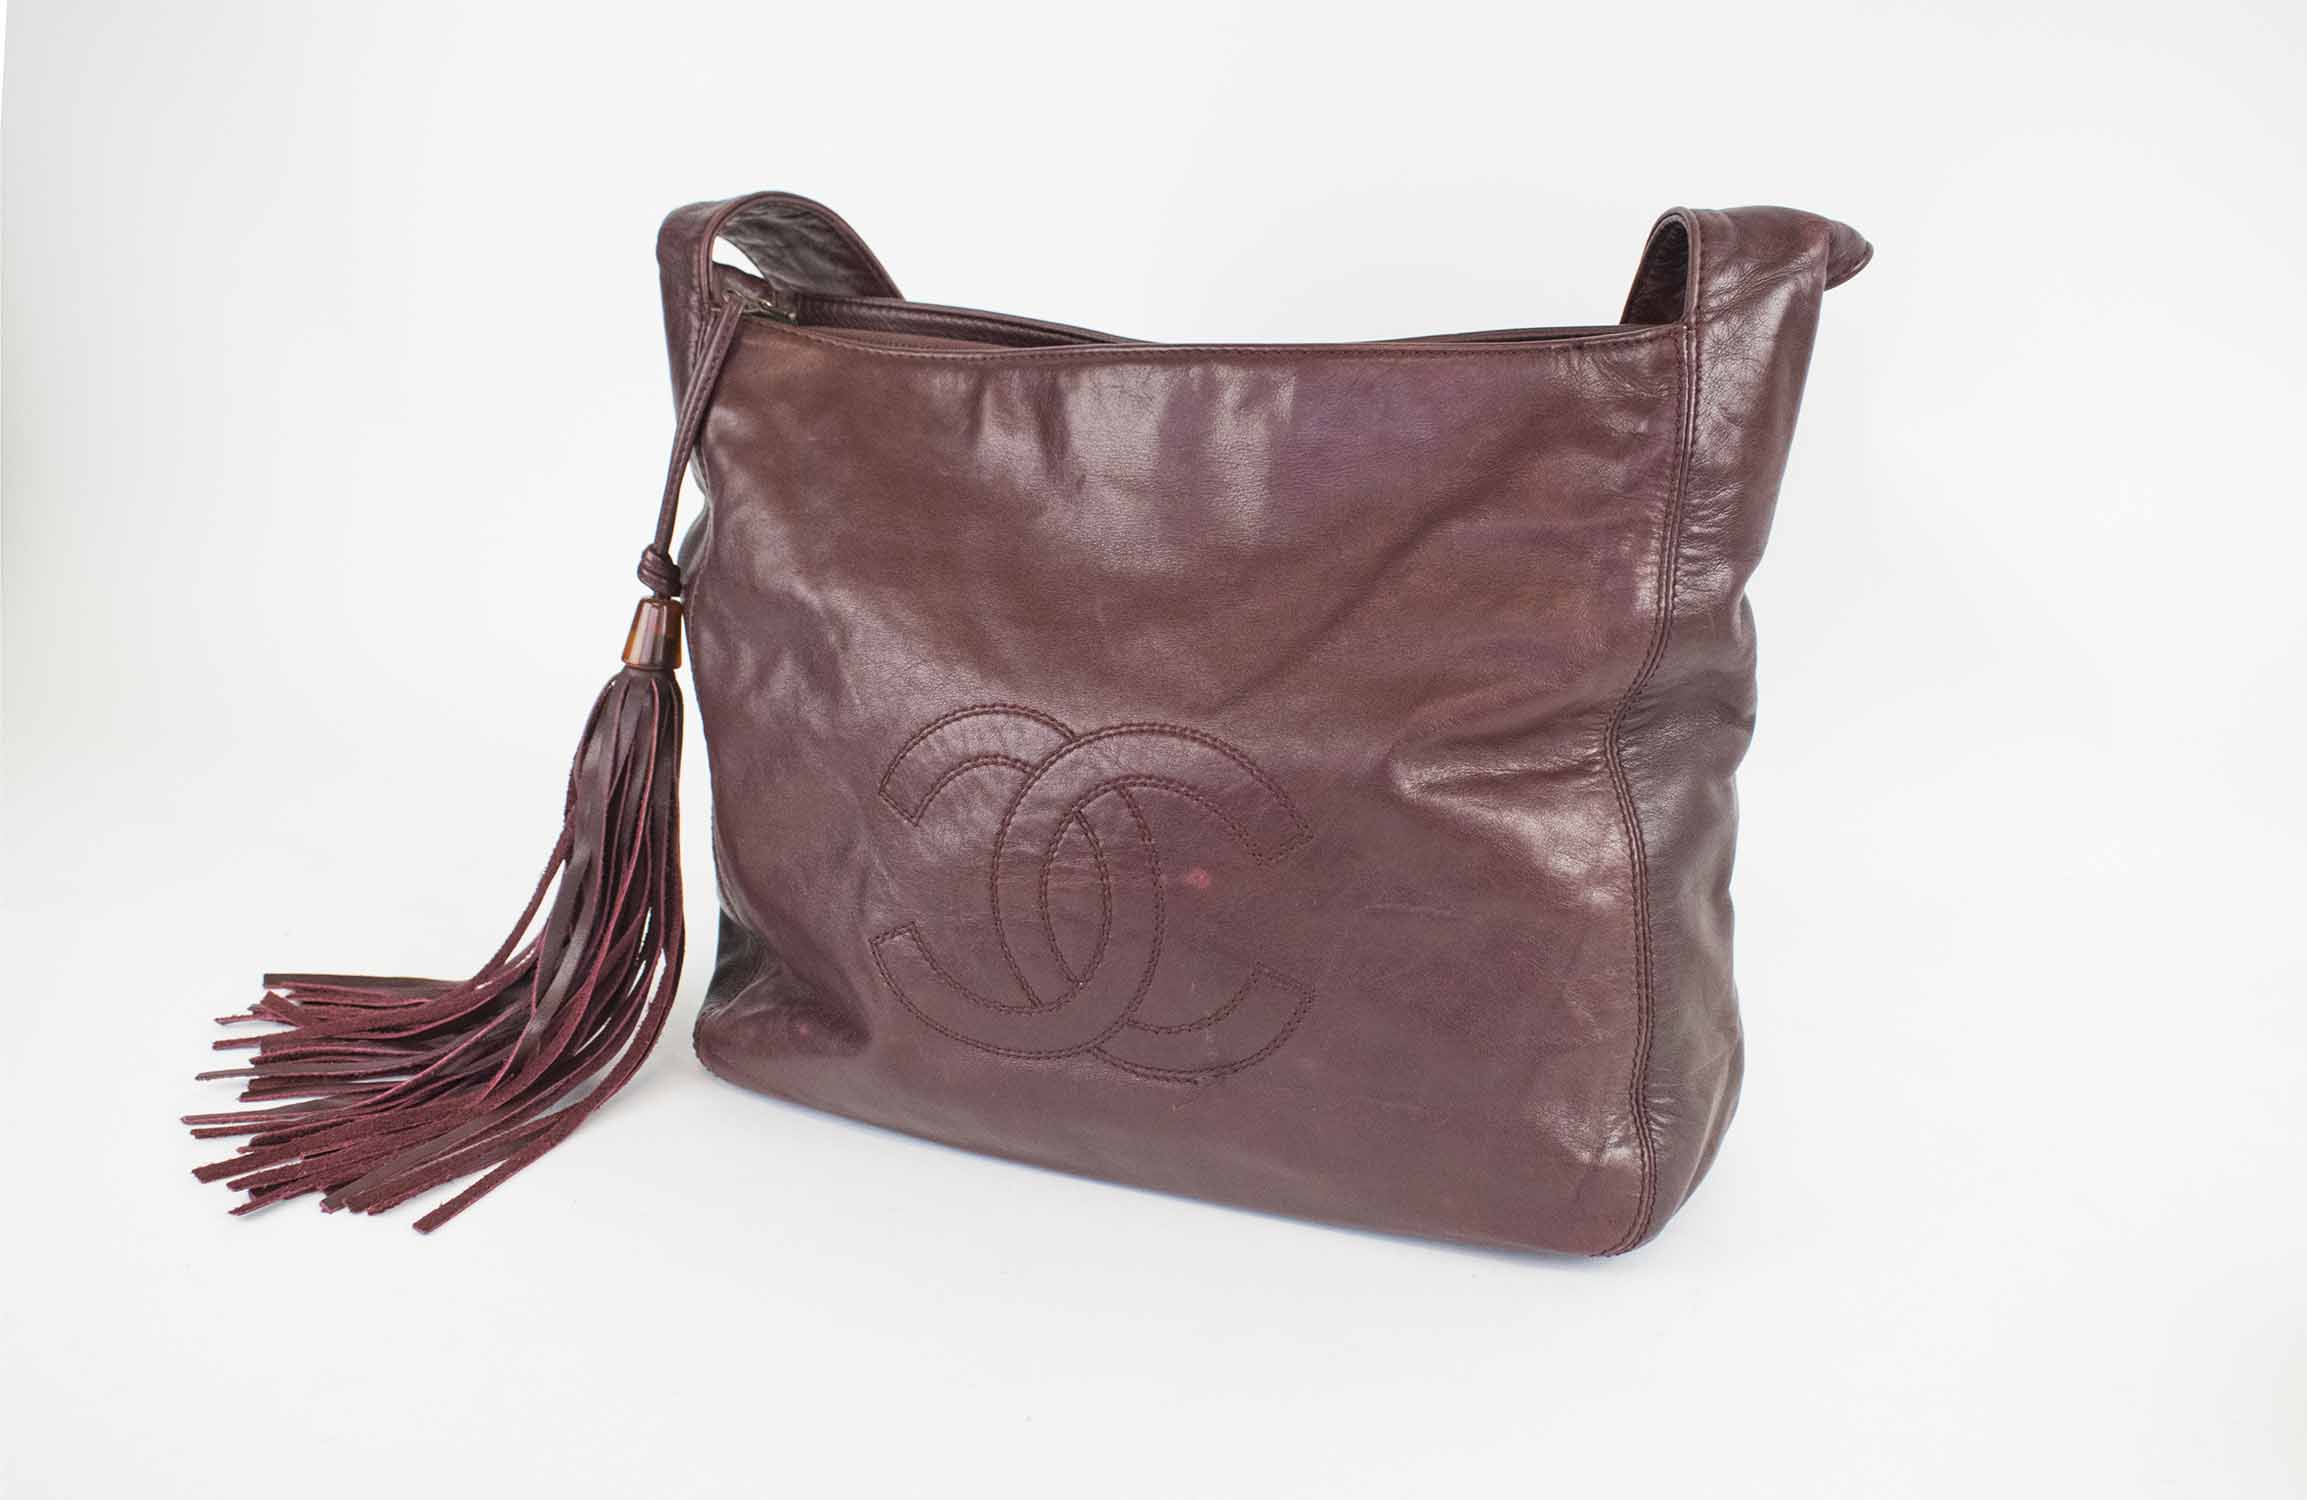 CHANEL VINTAGE SHOULDER BAG, burgundy leather with matching fabric lining,  shoulder strap and long tassel with logo, logo at the front and inside  sticker 5073721, 28cm x 26cm H x 10cm.